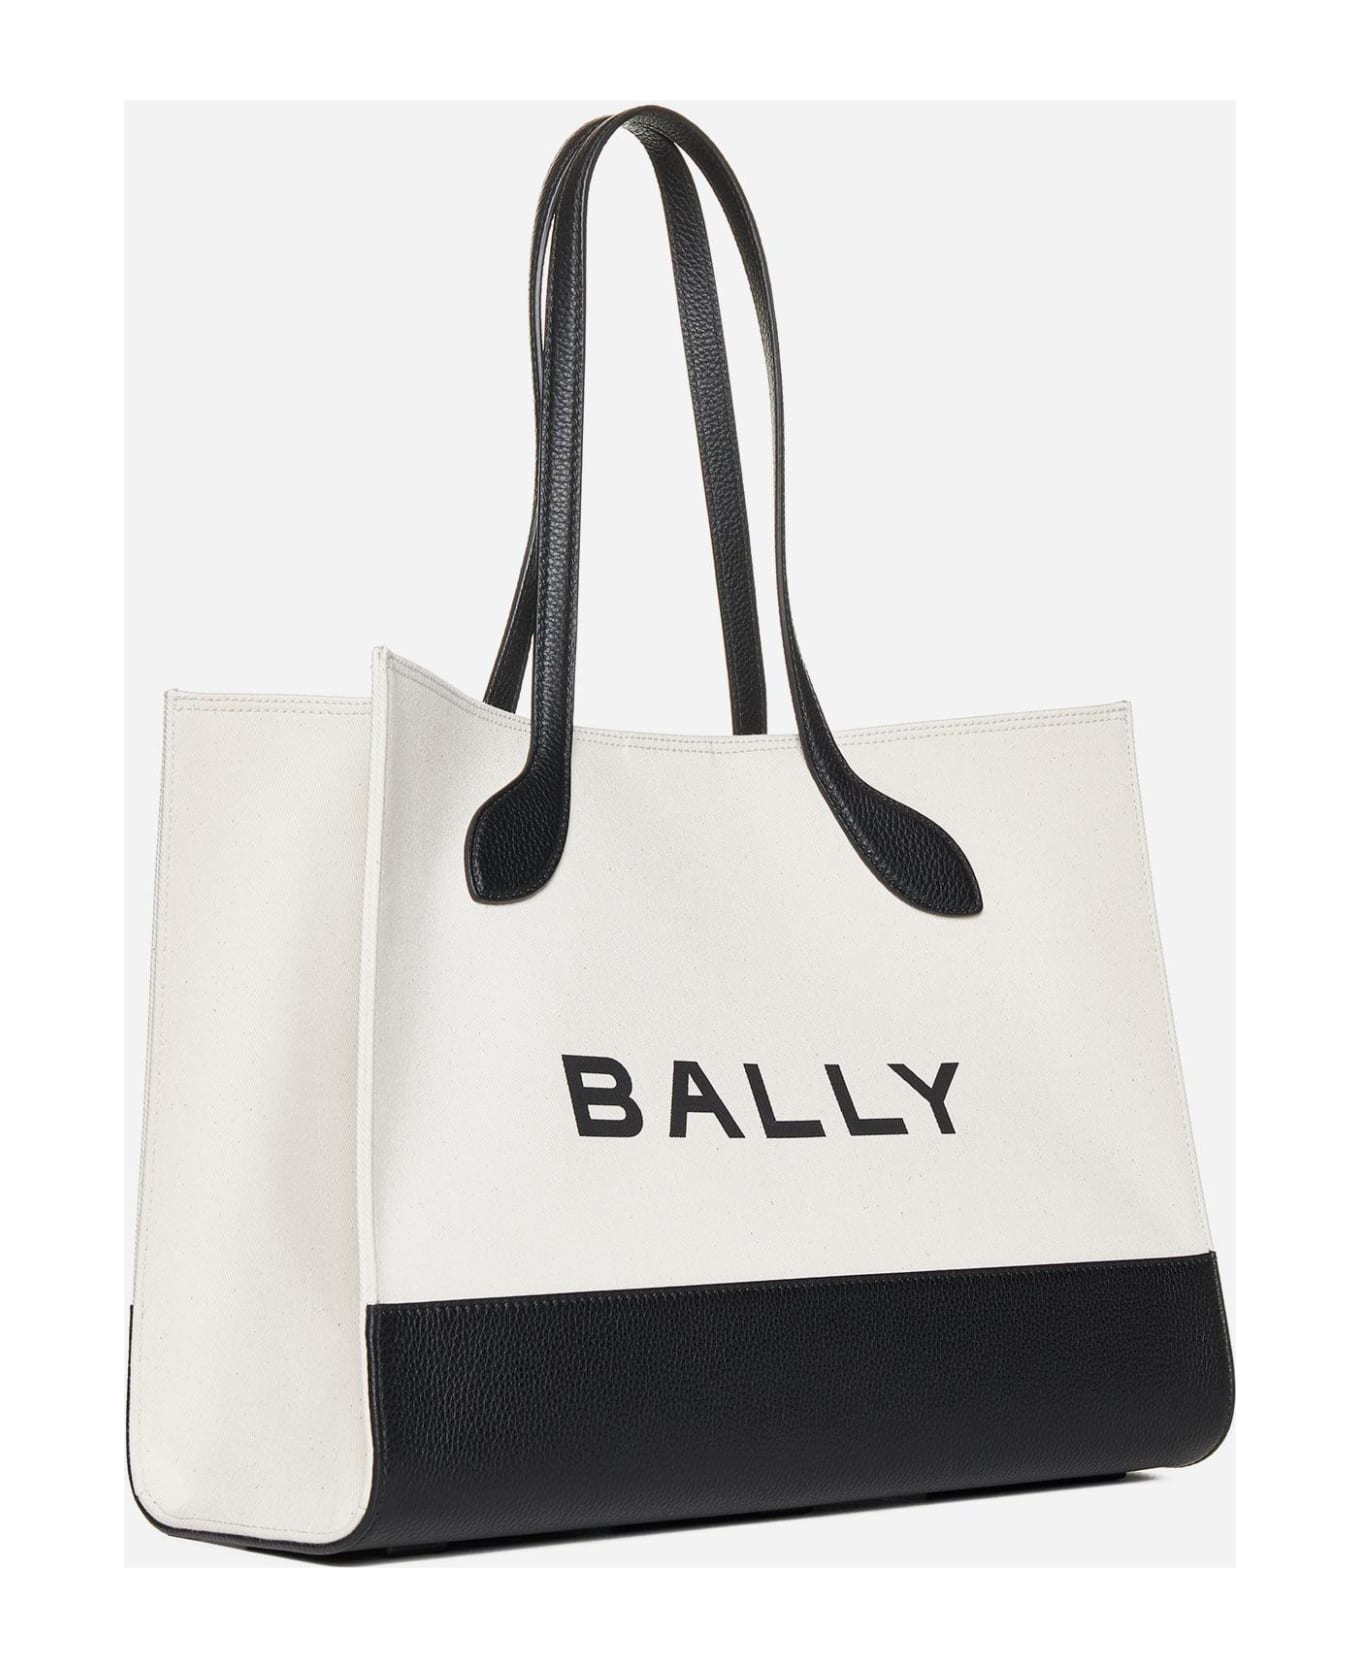 Bally Logo Canvas And Leather Tote Bag - White